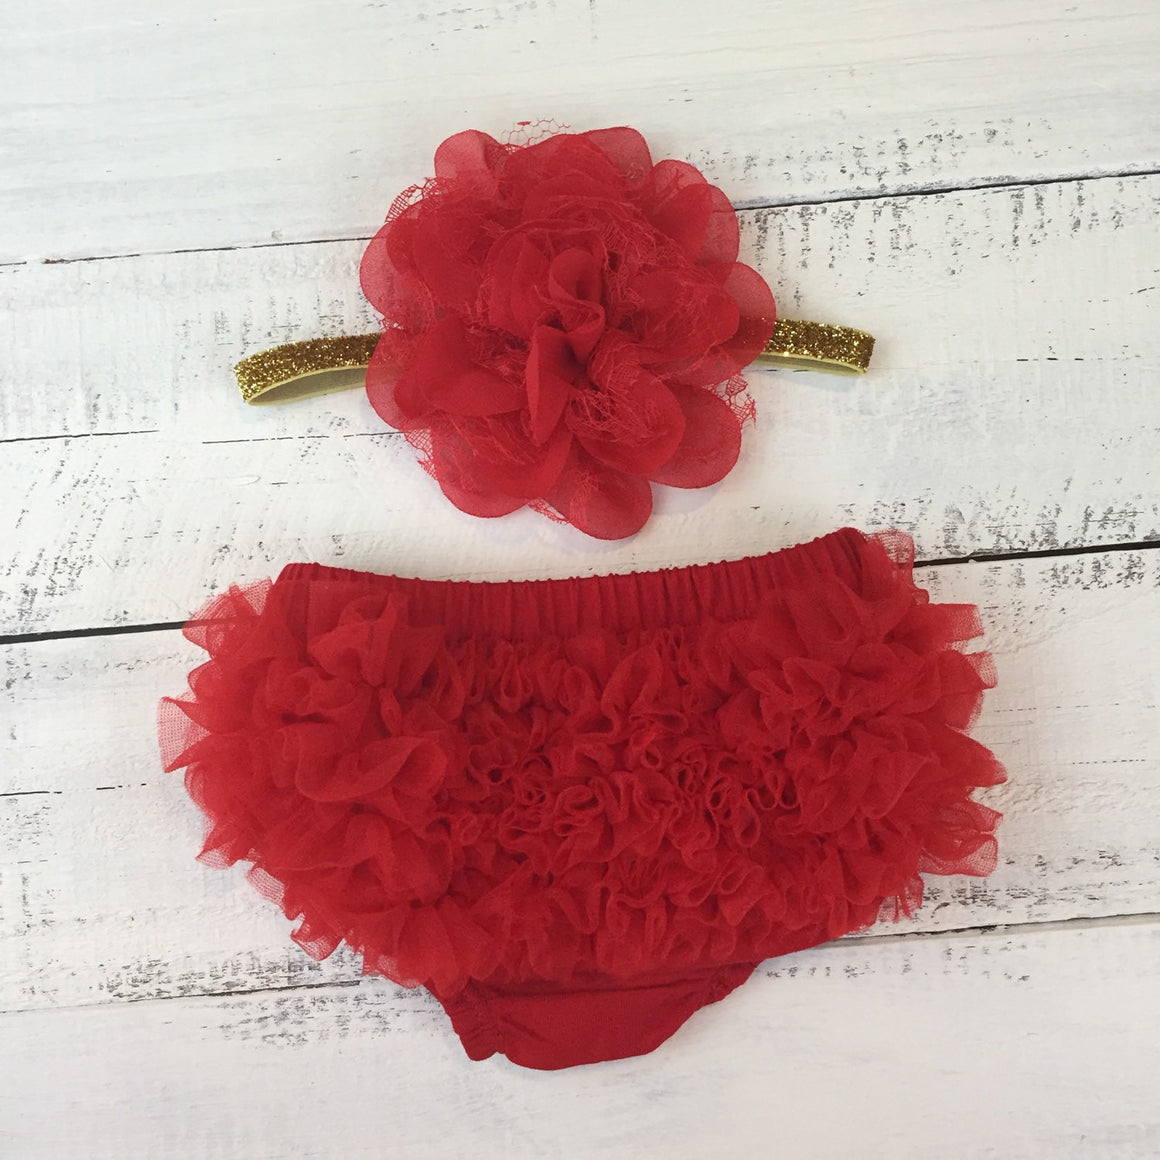 Red ruffle bottom bloomers and Silver/Gold flower headband - HoneyLoveBoutique